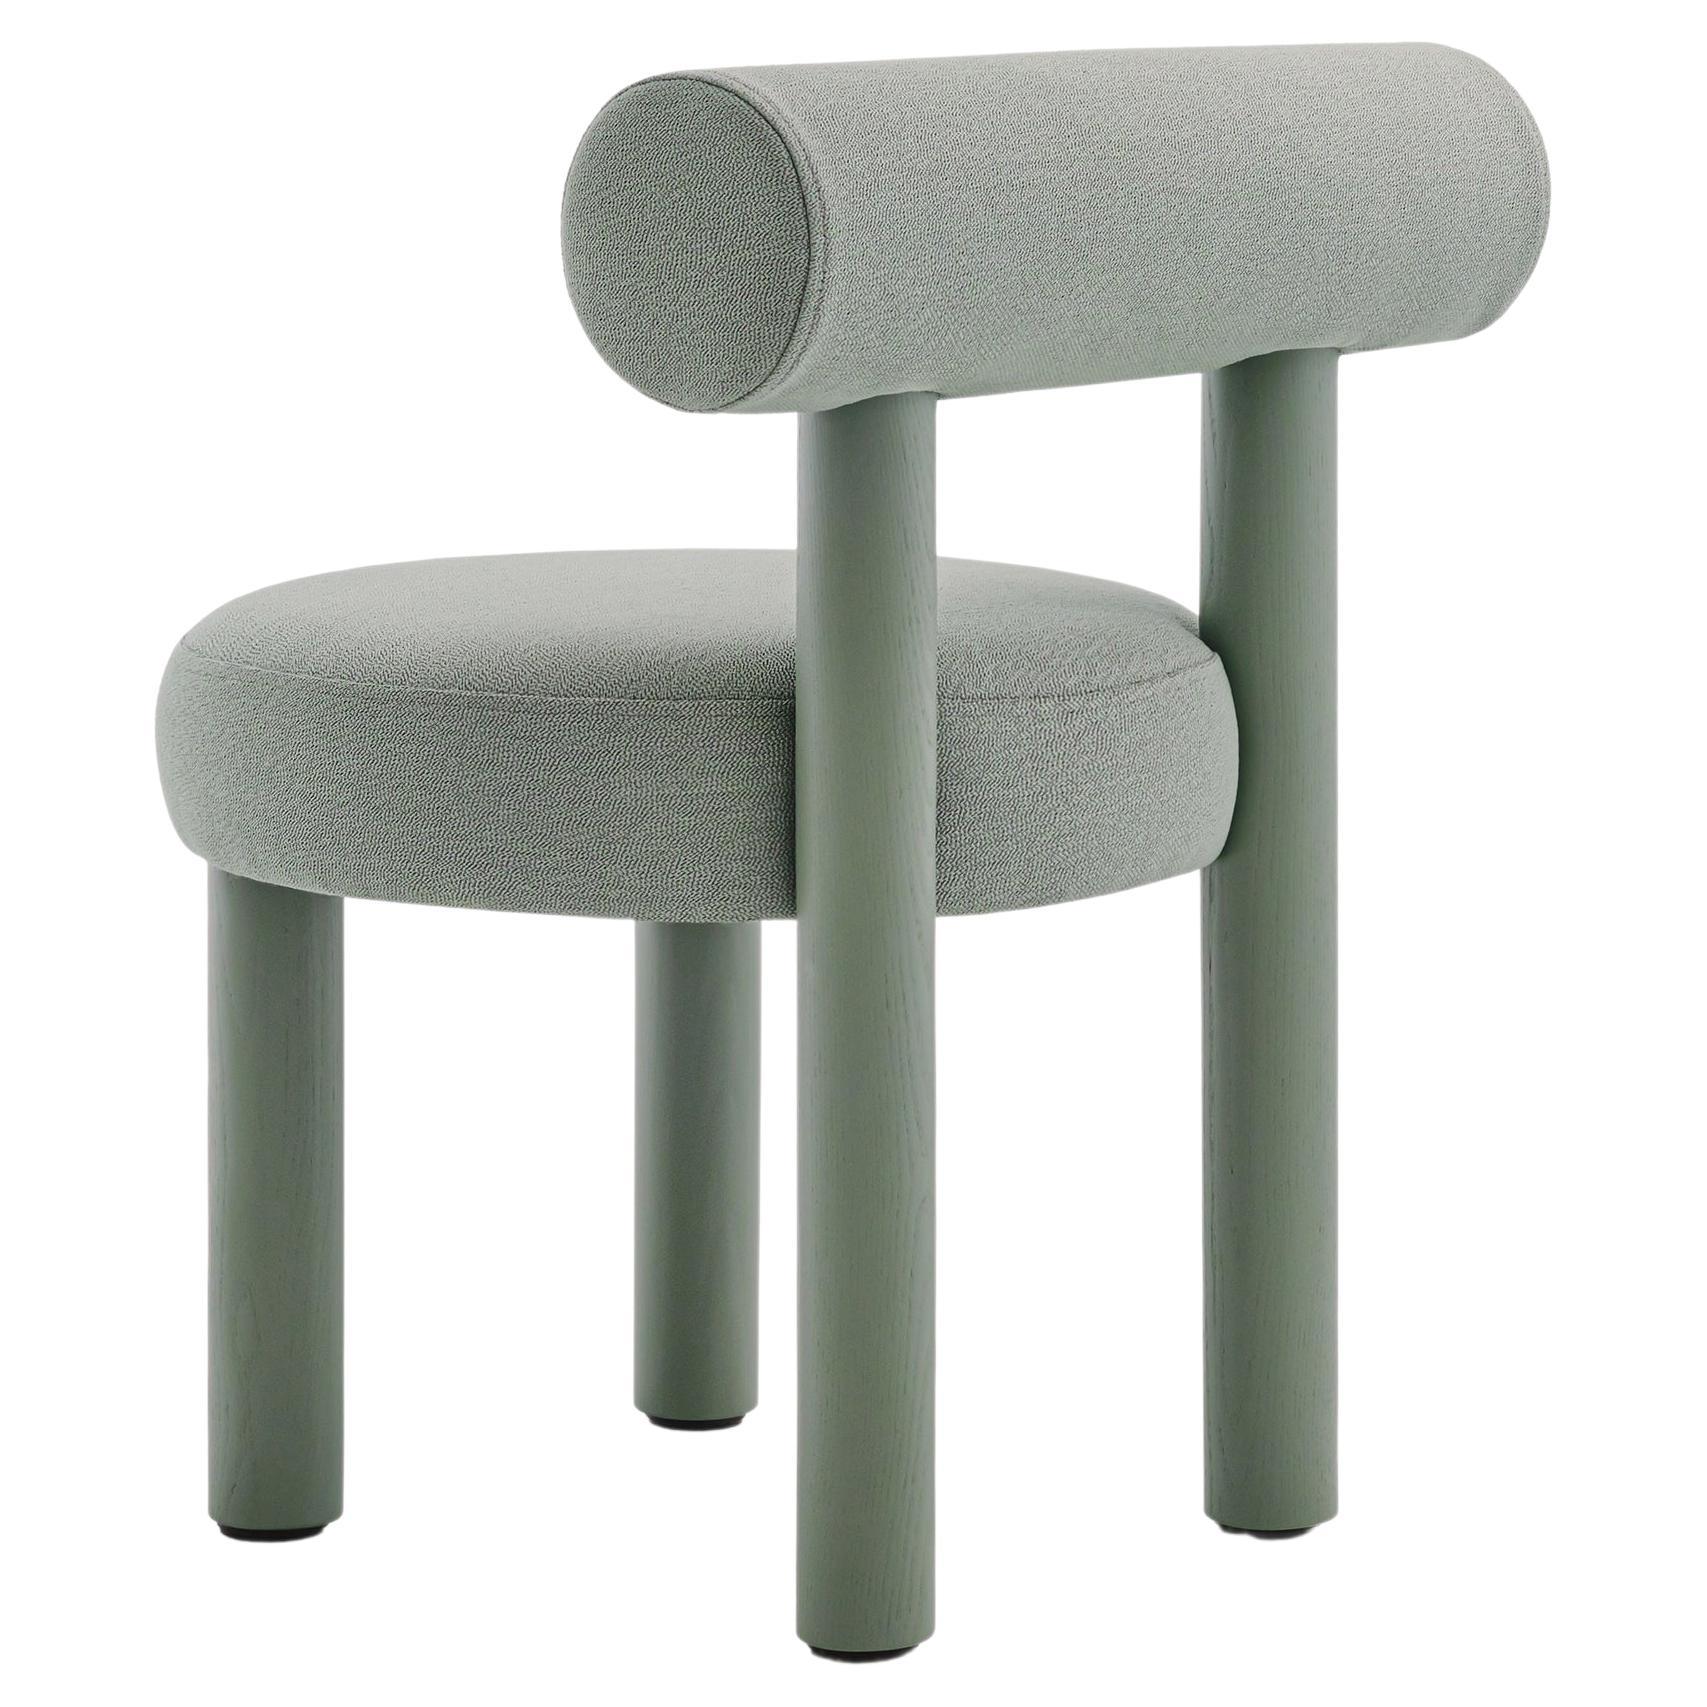 Modern Dining Chair Gropius CS2 with Wooden Legs Painted in RAL color by Noom